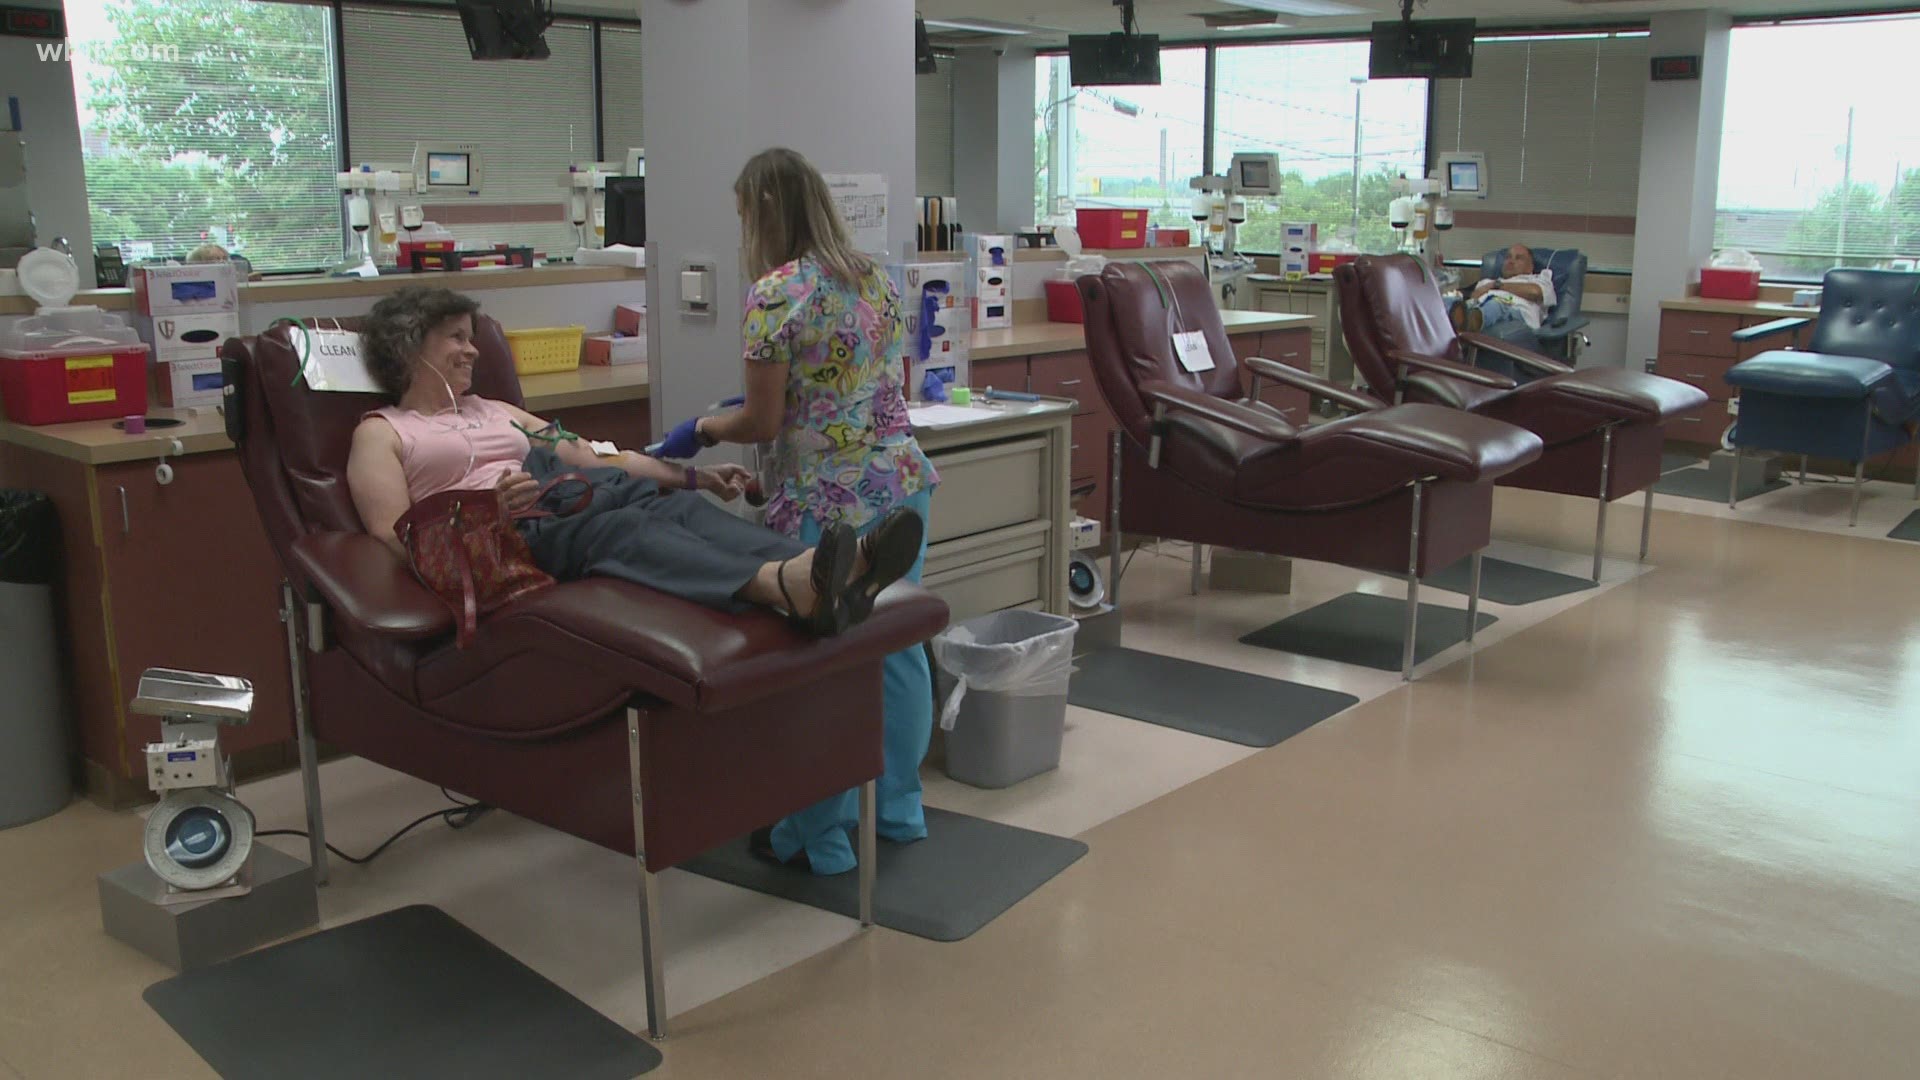 MEDIC Regional Blood Center said it usually sees an increase in demand for blood during summer since more people get out and more accidents happen.